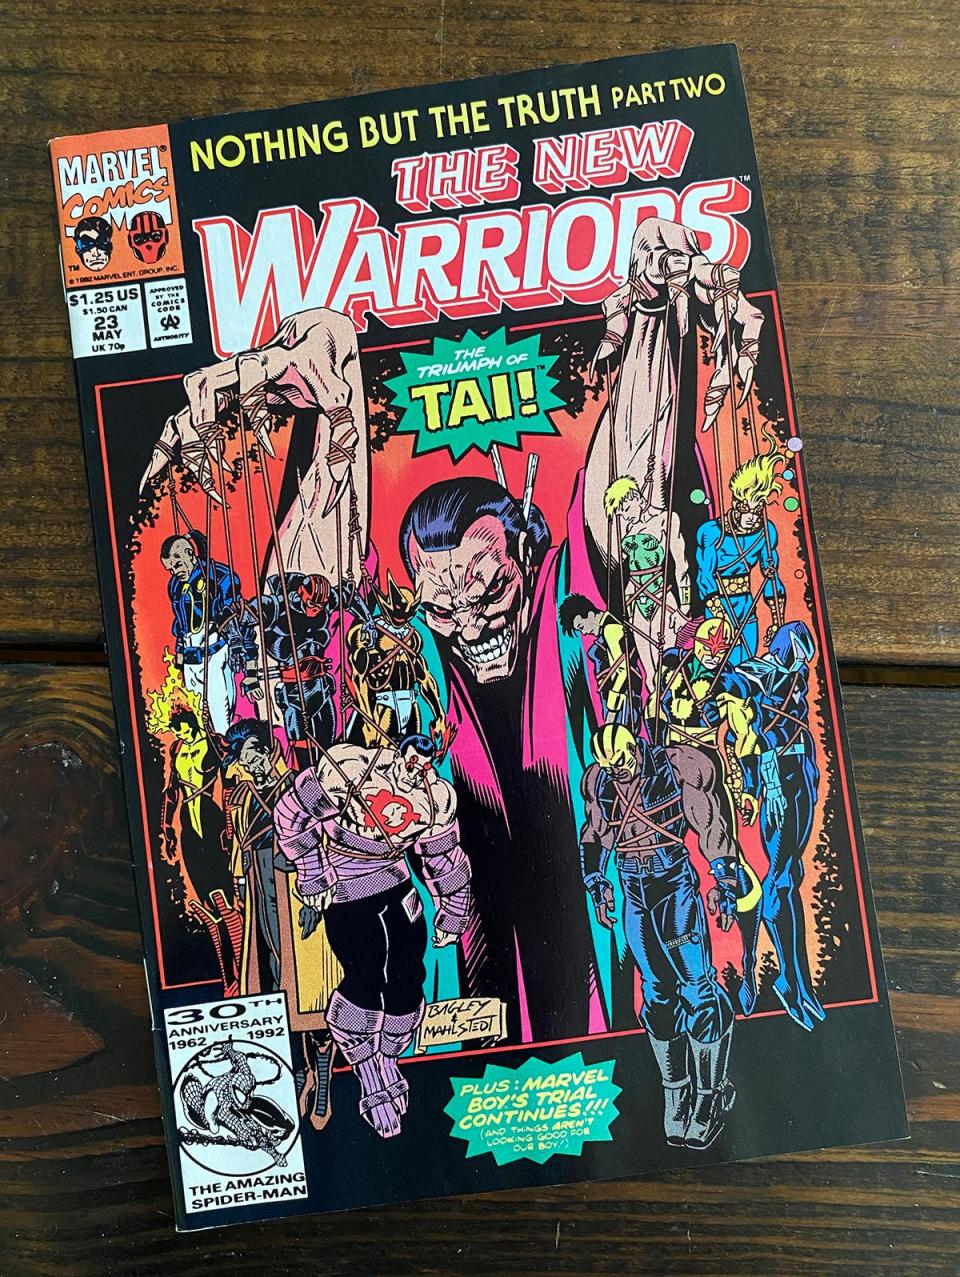 The Author's Long Sought After The New Warriors #23, Finally Found at Neighborhood Comics Clubhouse.